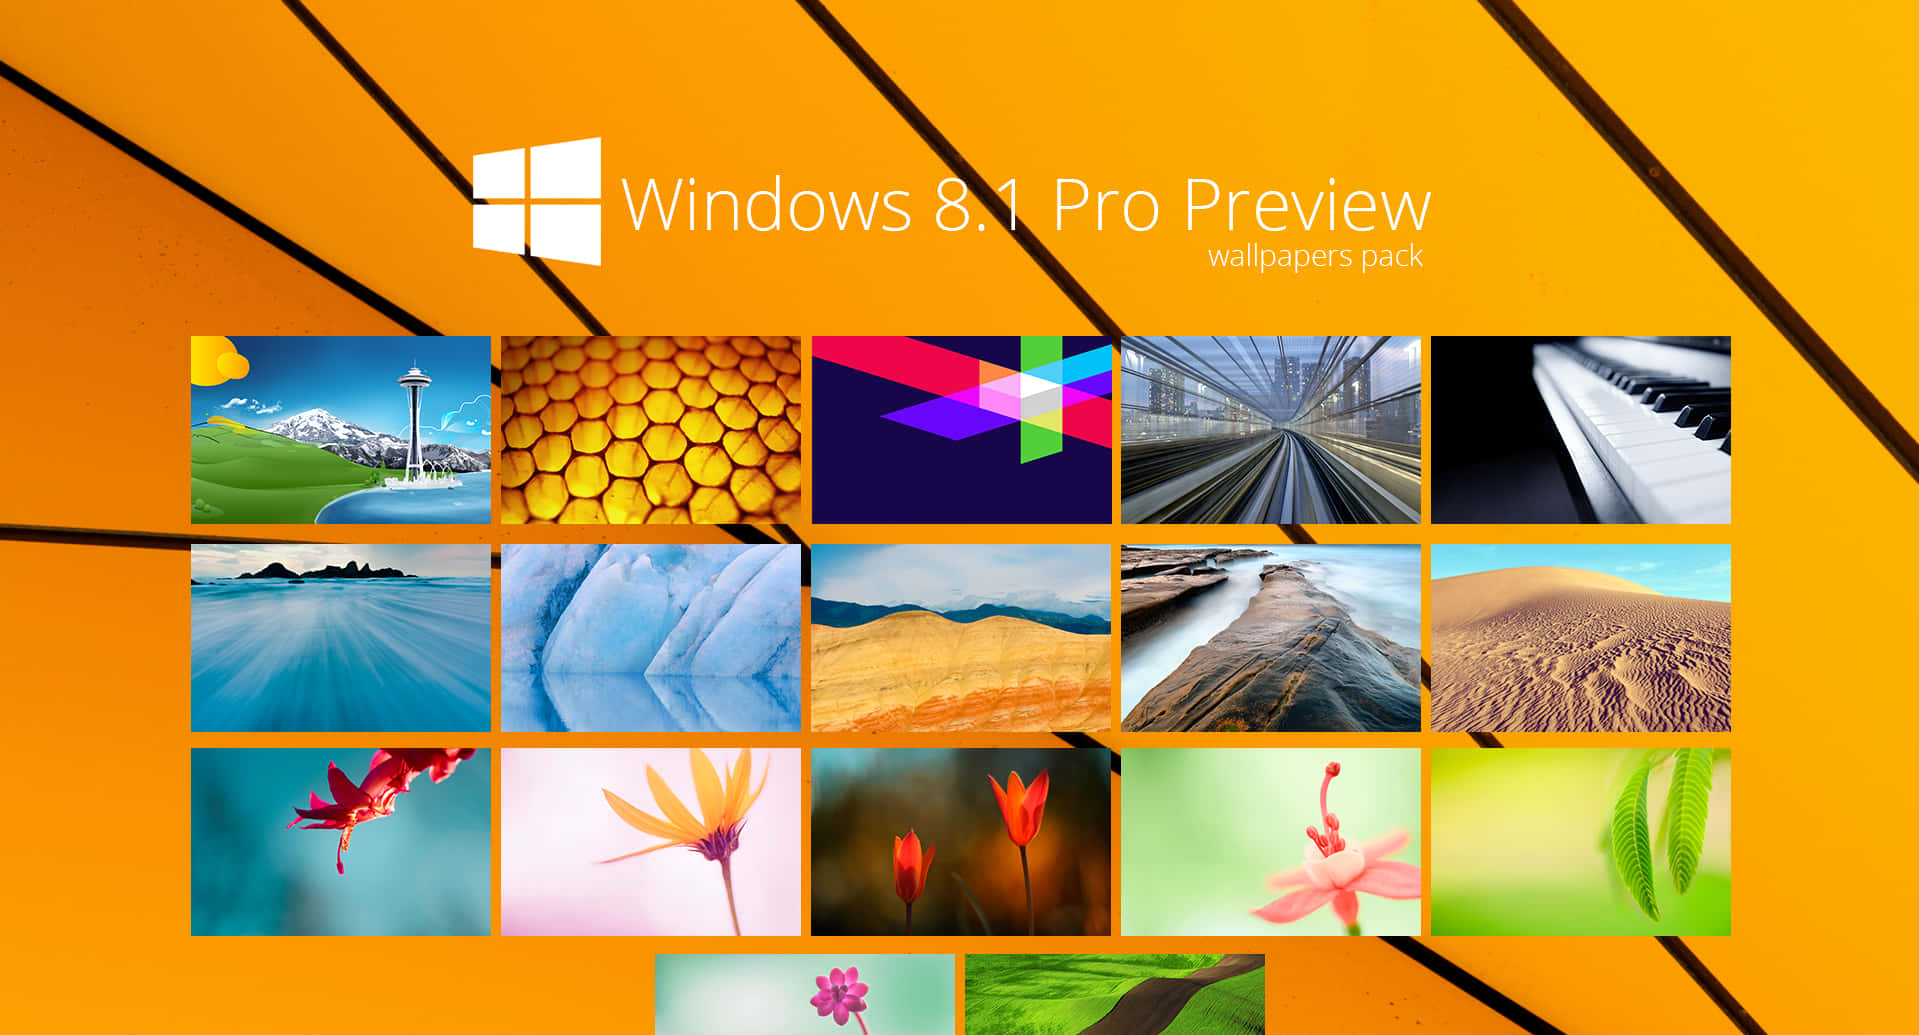 Get Up And Running With The Latest Operating System From Microsoft—windows 8.1